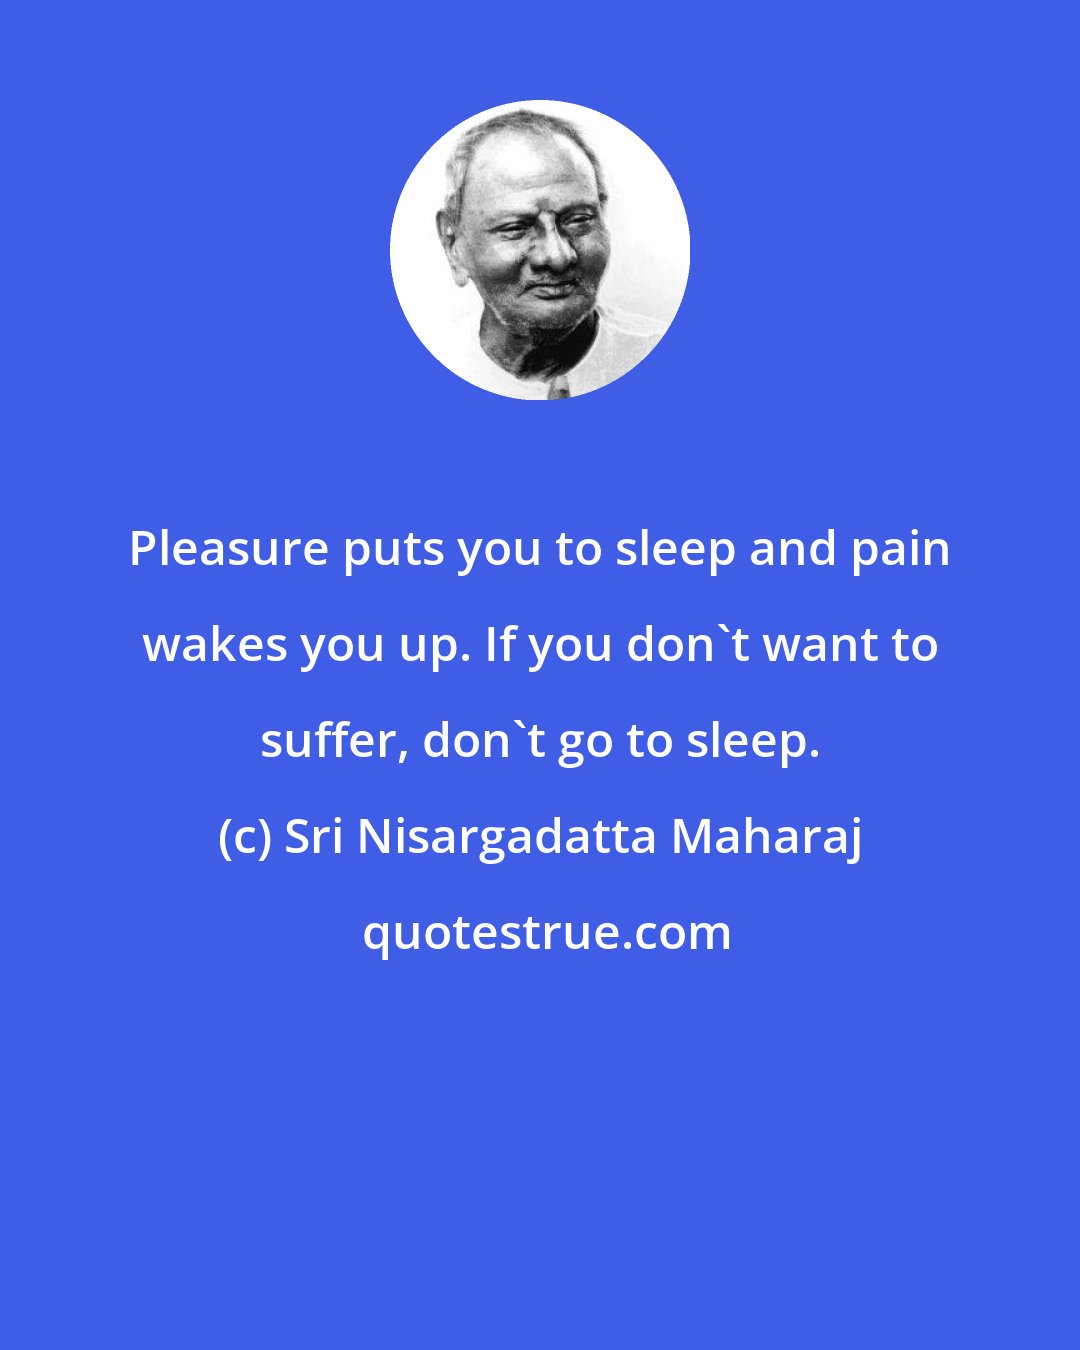 Sri Nisargadatta Maharaj: Pleasure puts you to sleep and pain wakes you up. If you don't want to suffer, don't go to sleep.